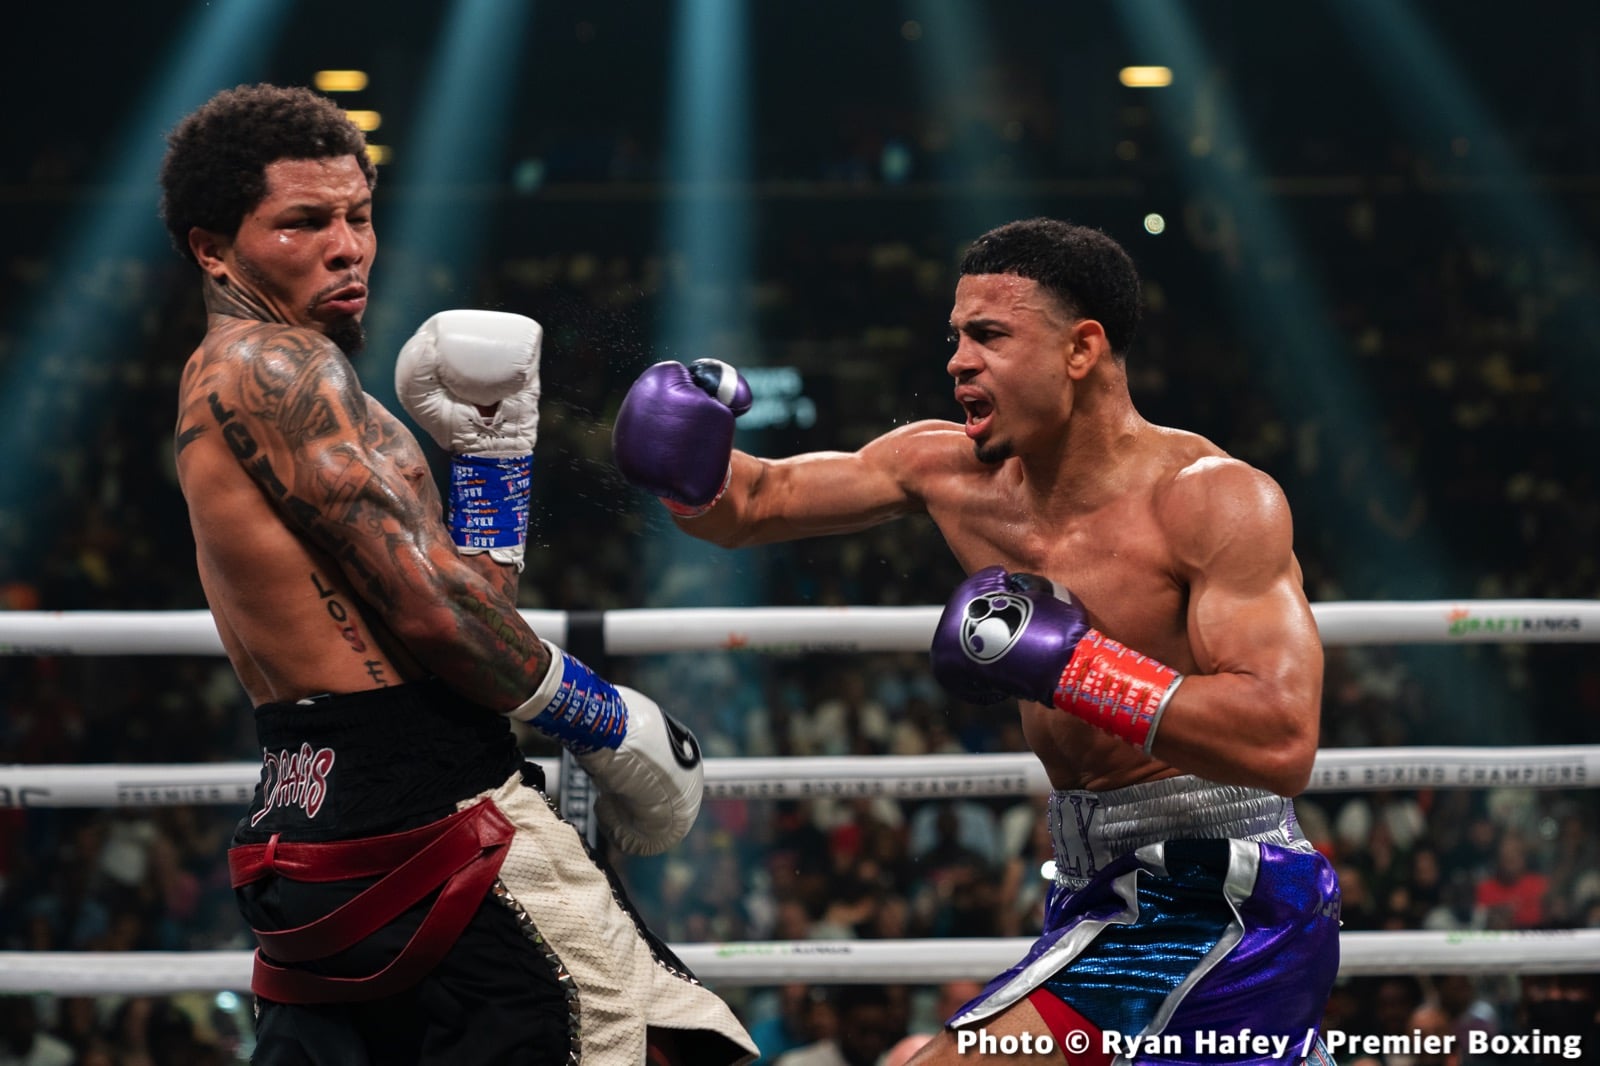 Image: Rolly Romero has plan to lure Gervonta Davis into giving him a rematch